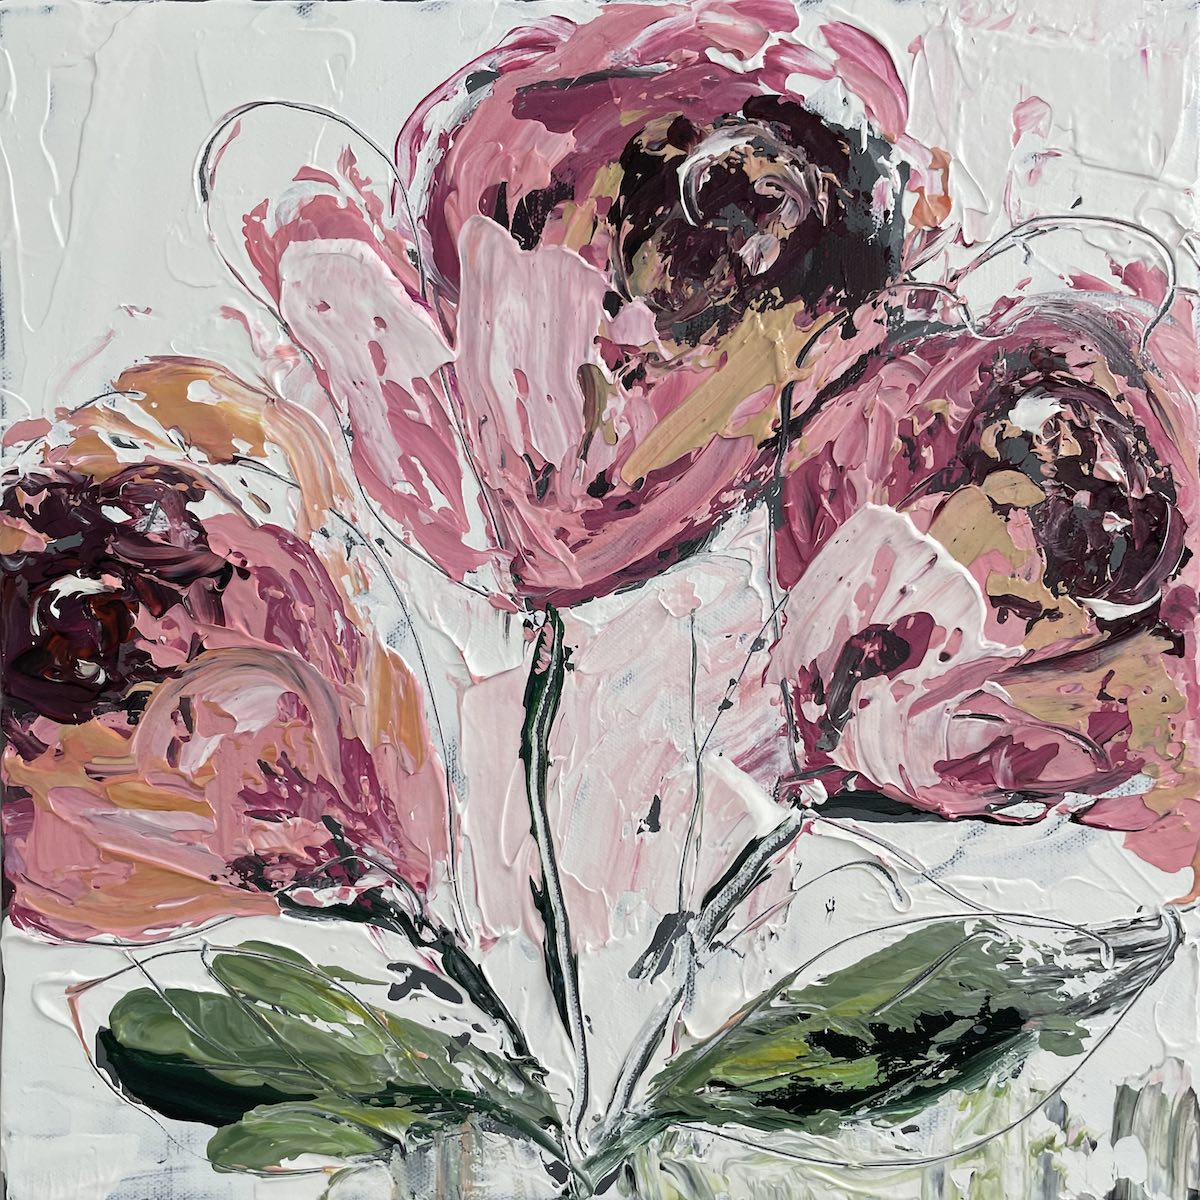 Floral Abstract Paintings 12x12 inches